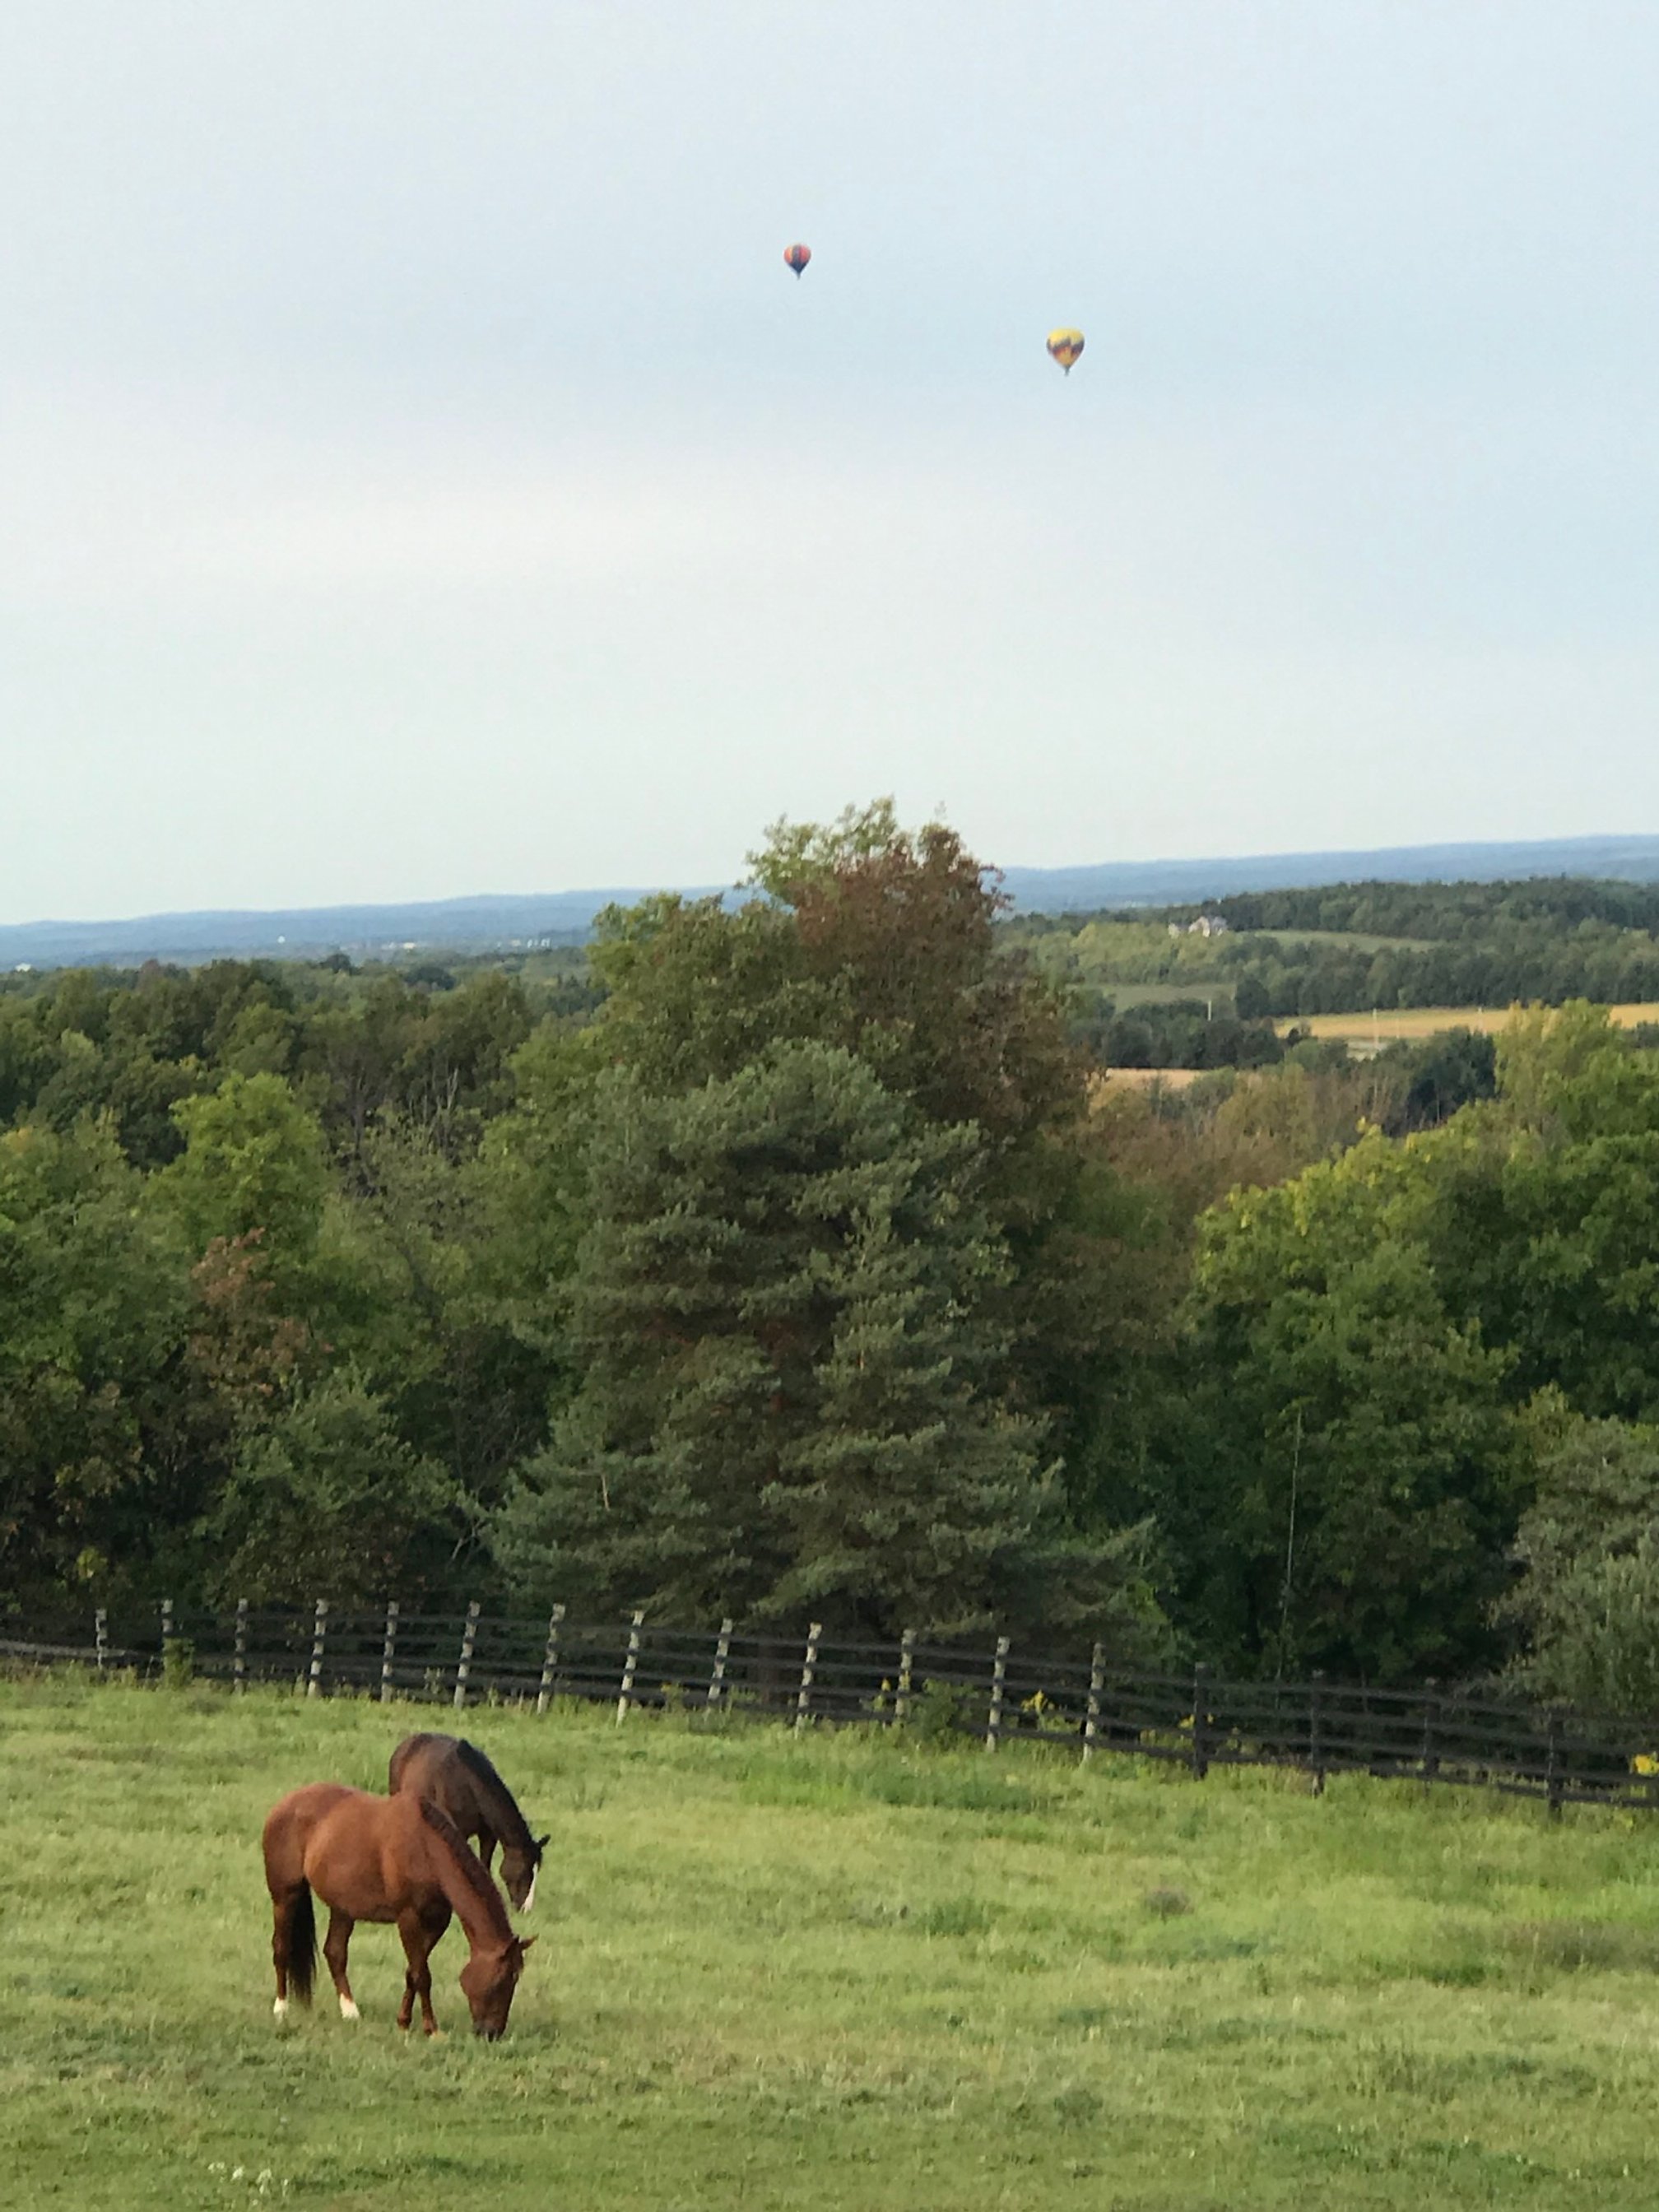  Horses In Pasture With Hot Air Balloons in Distance 